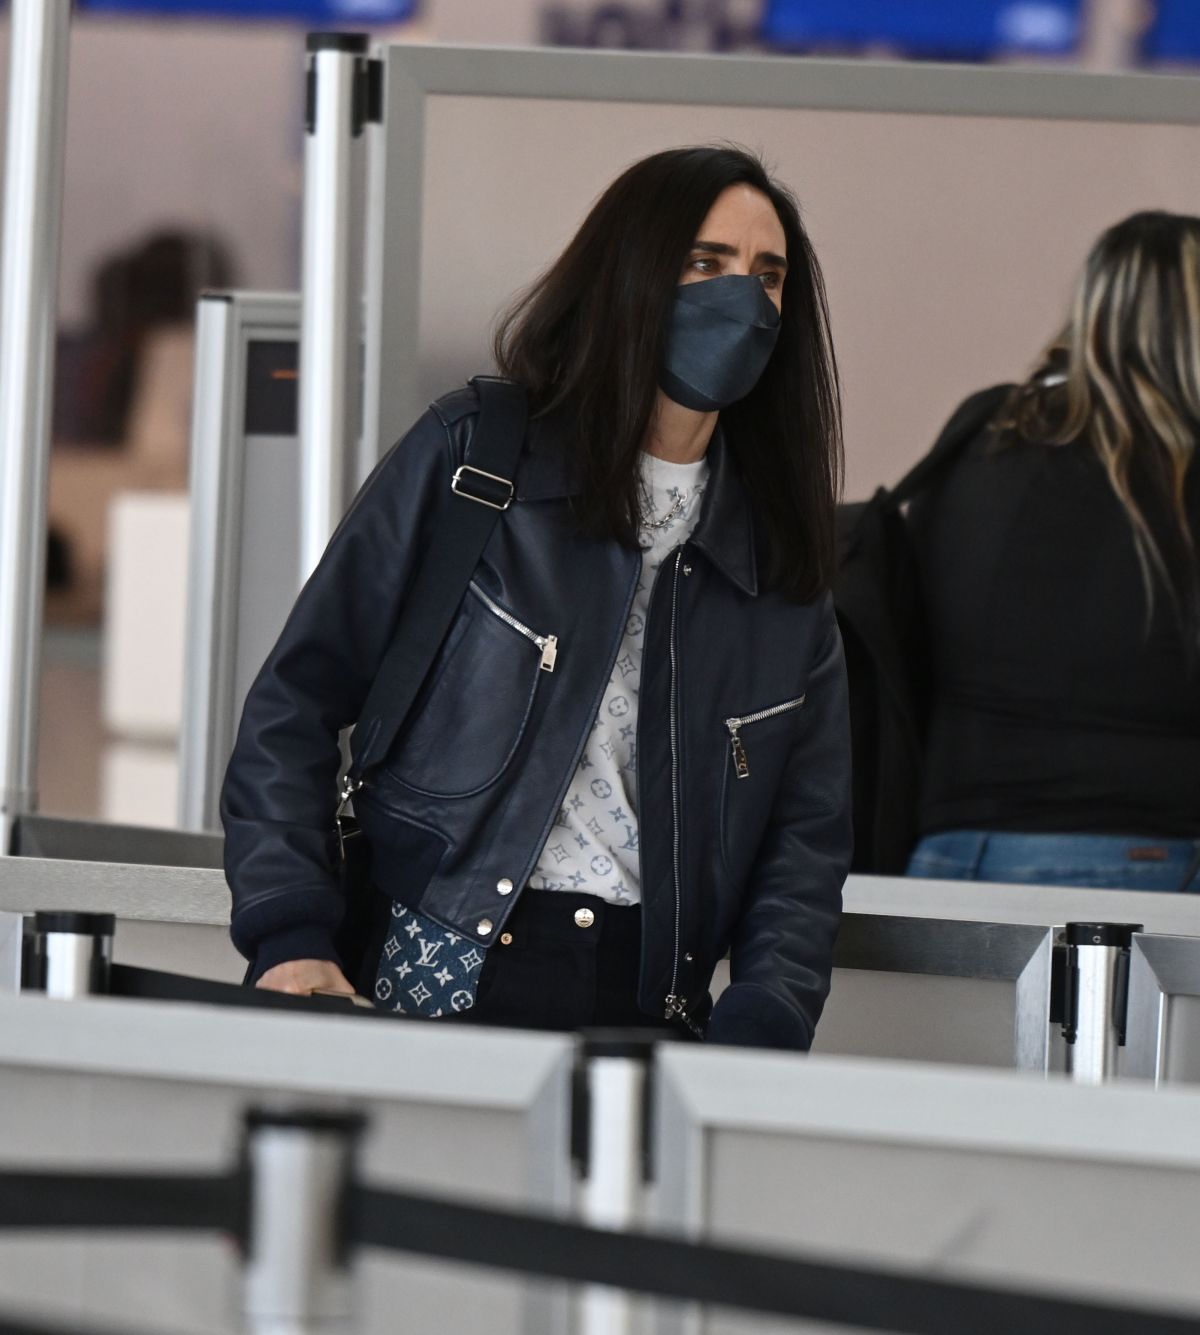 JENNIFER CONNELLY Arrives at JFK Airport in New York 05/14/2022 – HawtCelebs